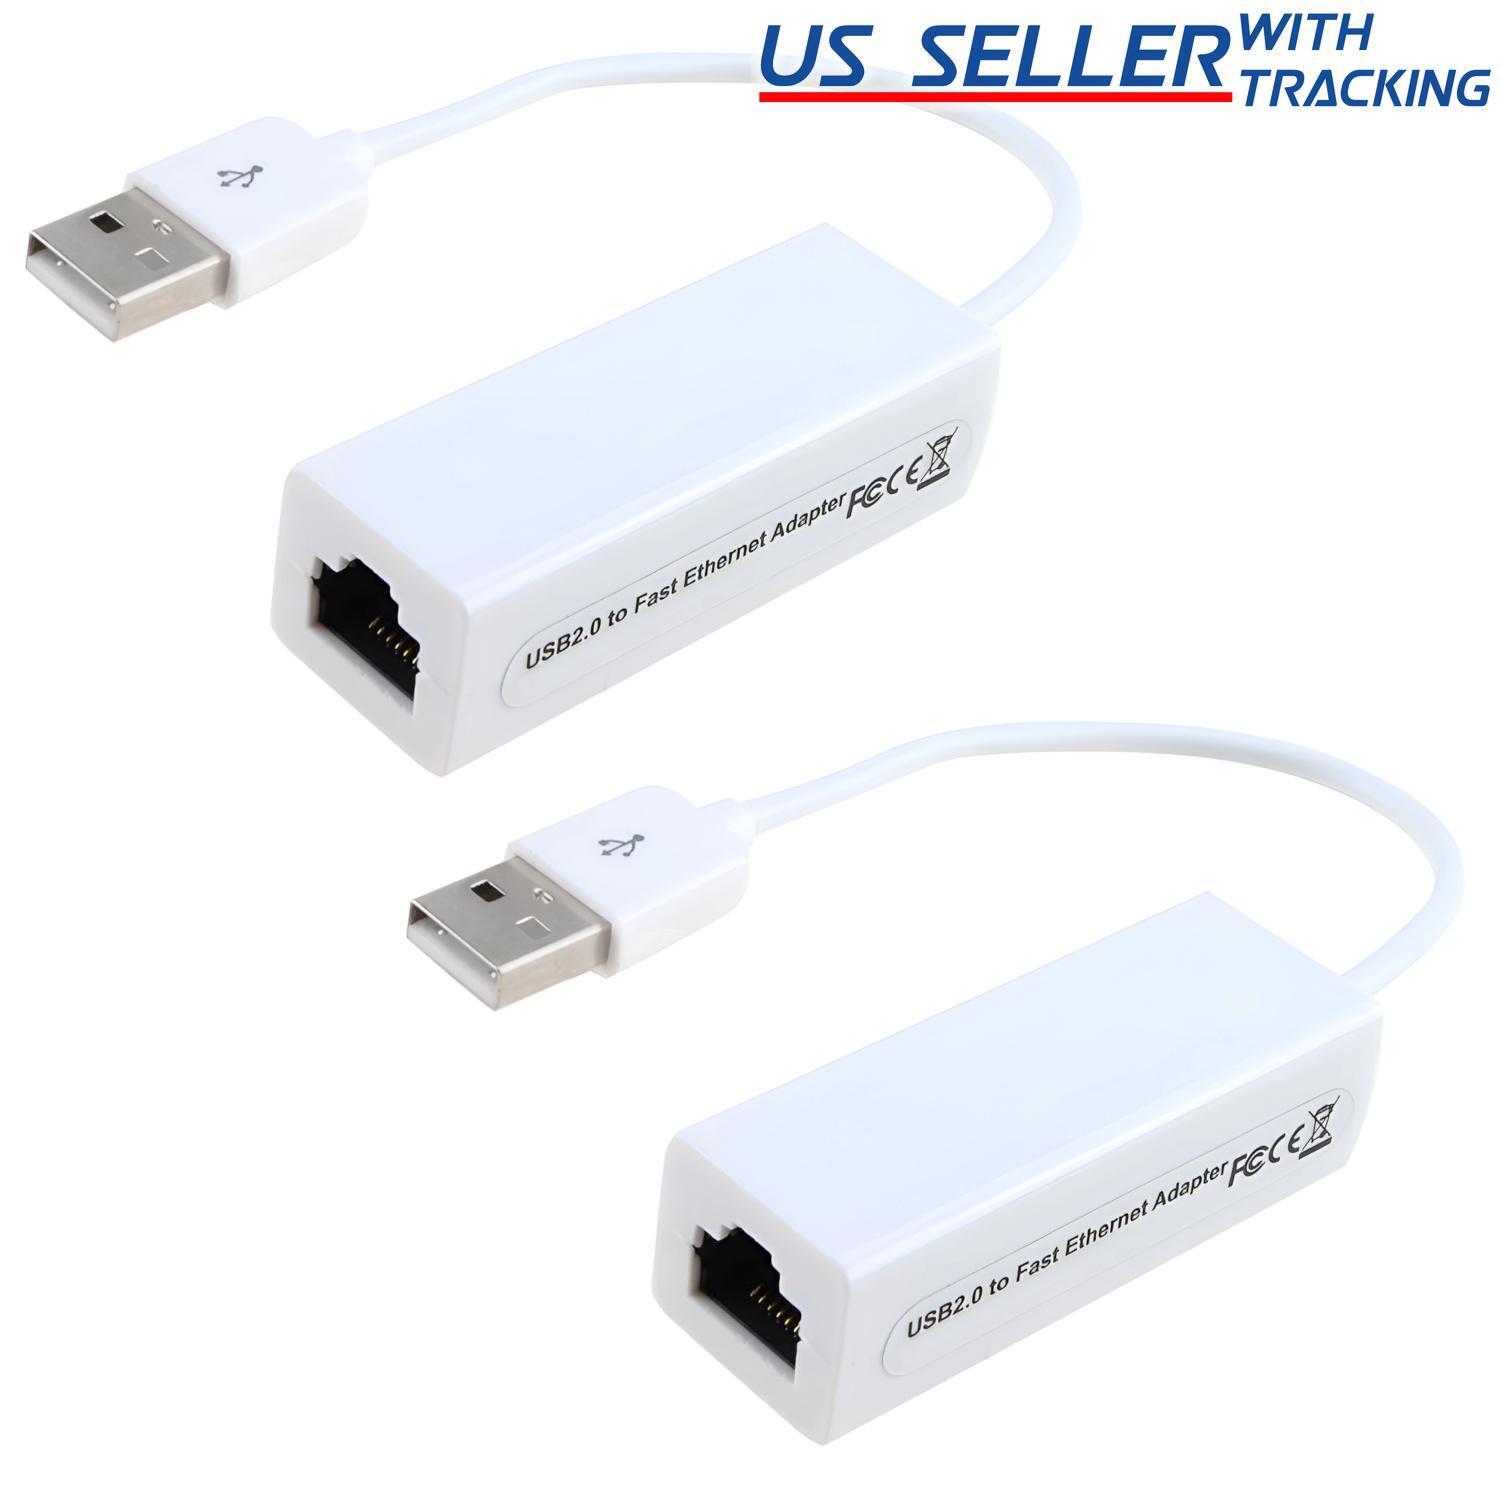 2pcs USB 2.0 Ethernet Network Adapter 100Mbps Wired LAN for Windows and Linux